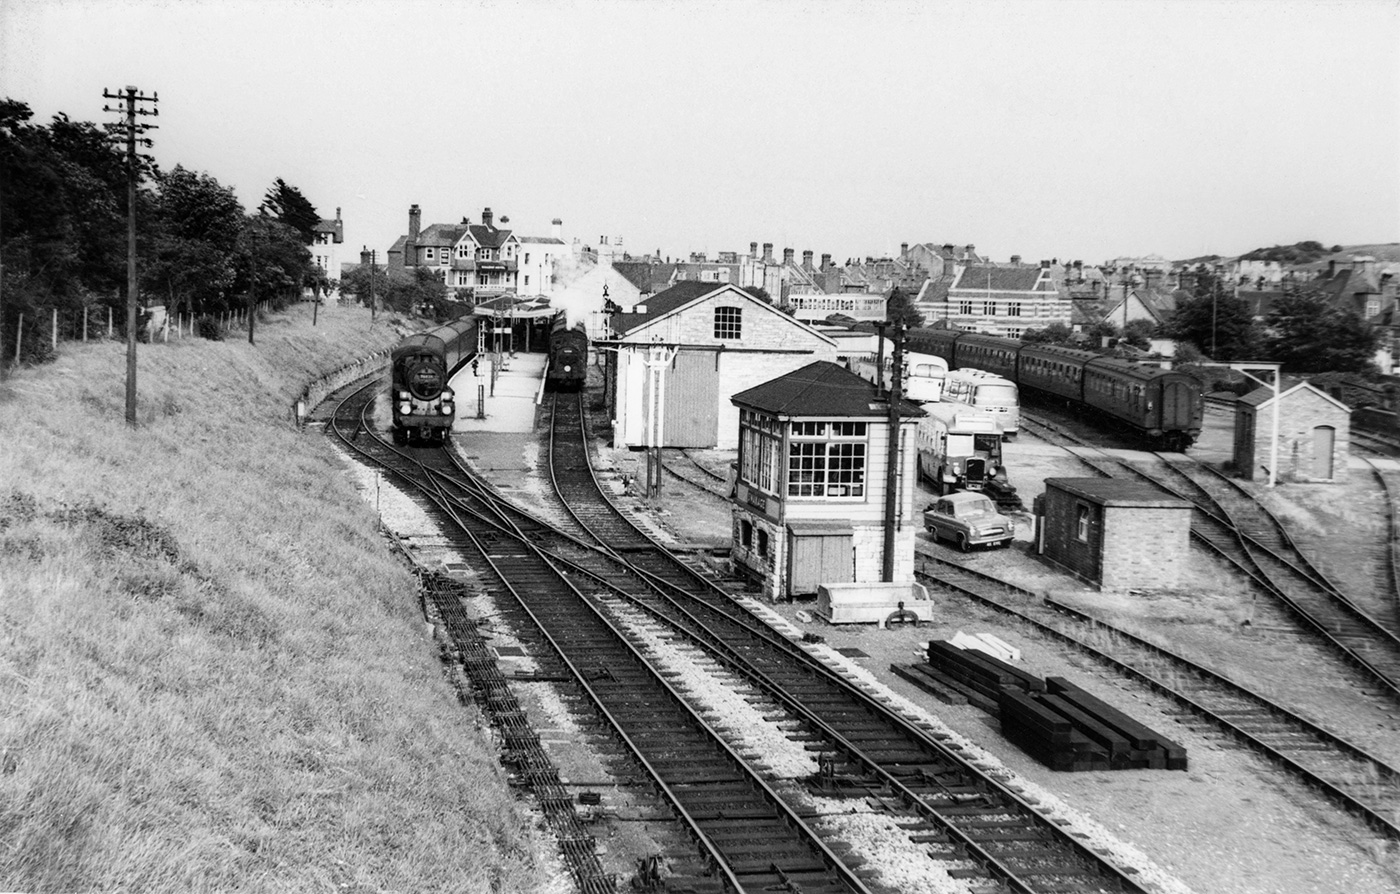 Station activity on a summer day in 1963